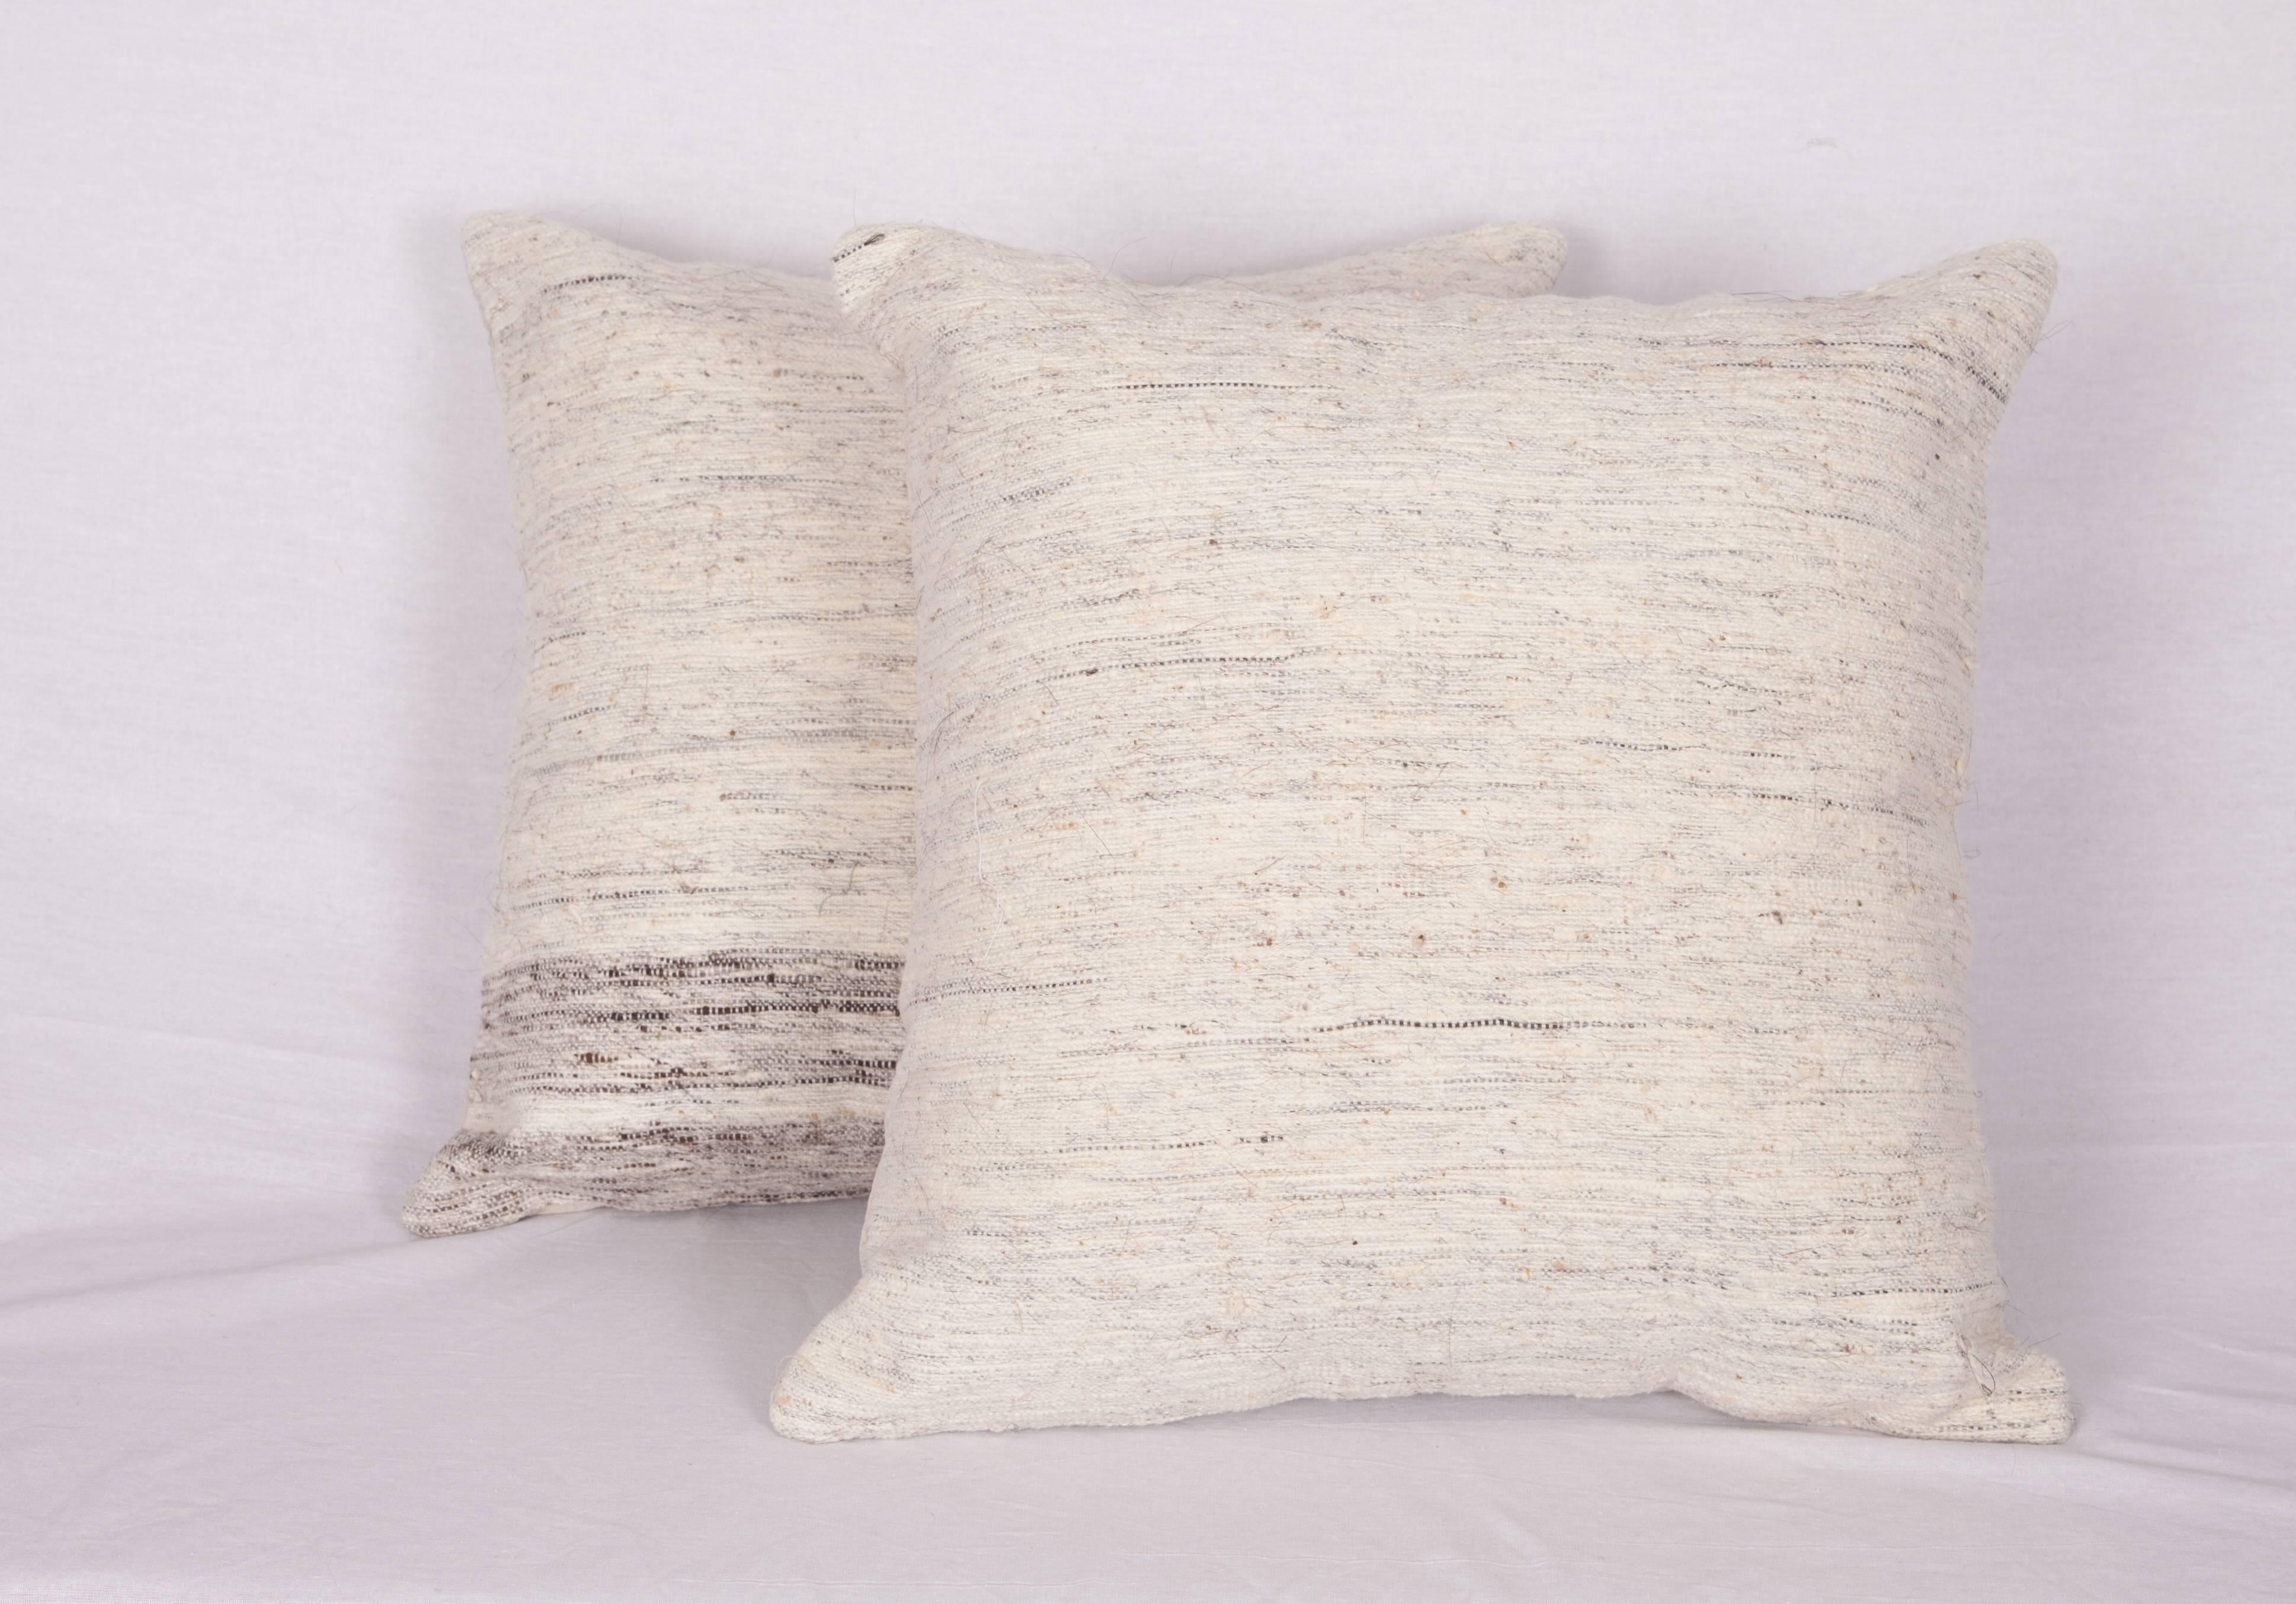 The pillows are made out of mid-20th century cotton and goat hair Kilim. They do not come with an insert but they come with a bag made to the size and out of cotton to accommodate the filling. The backing is made of linen. Please note filling is not